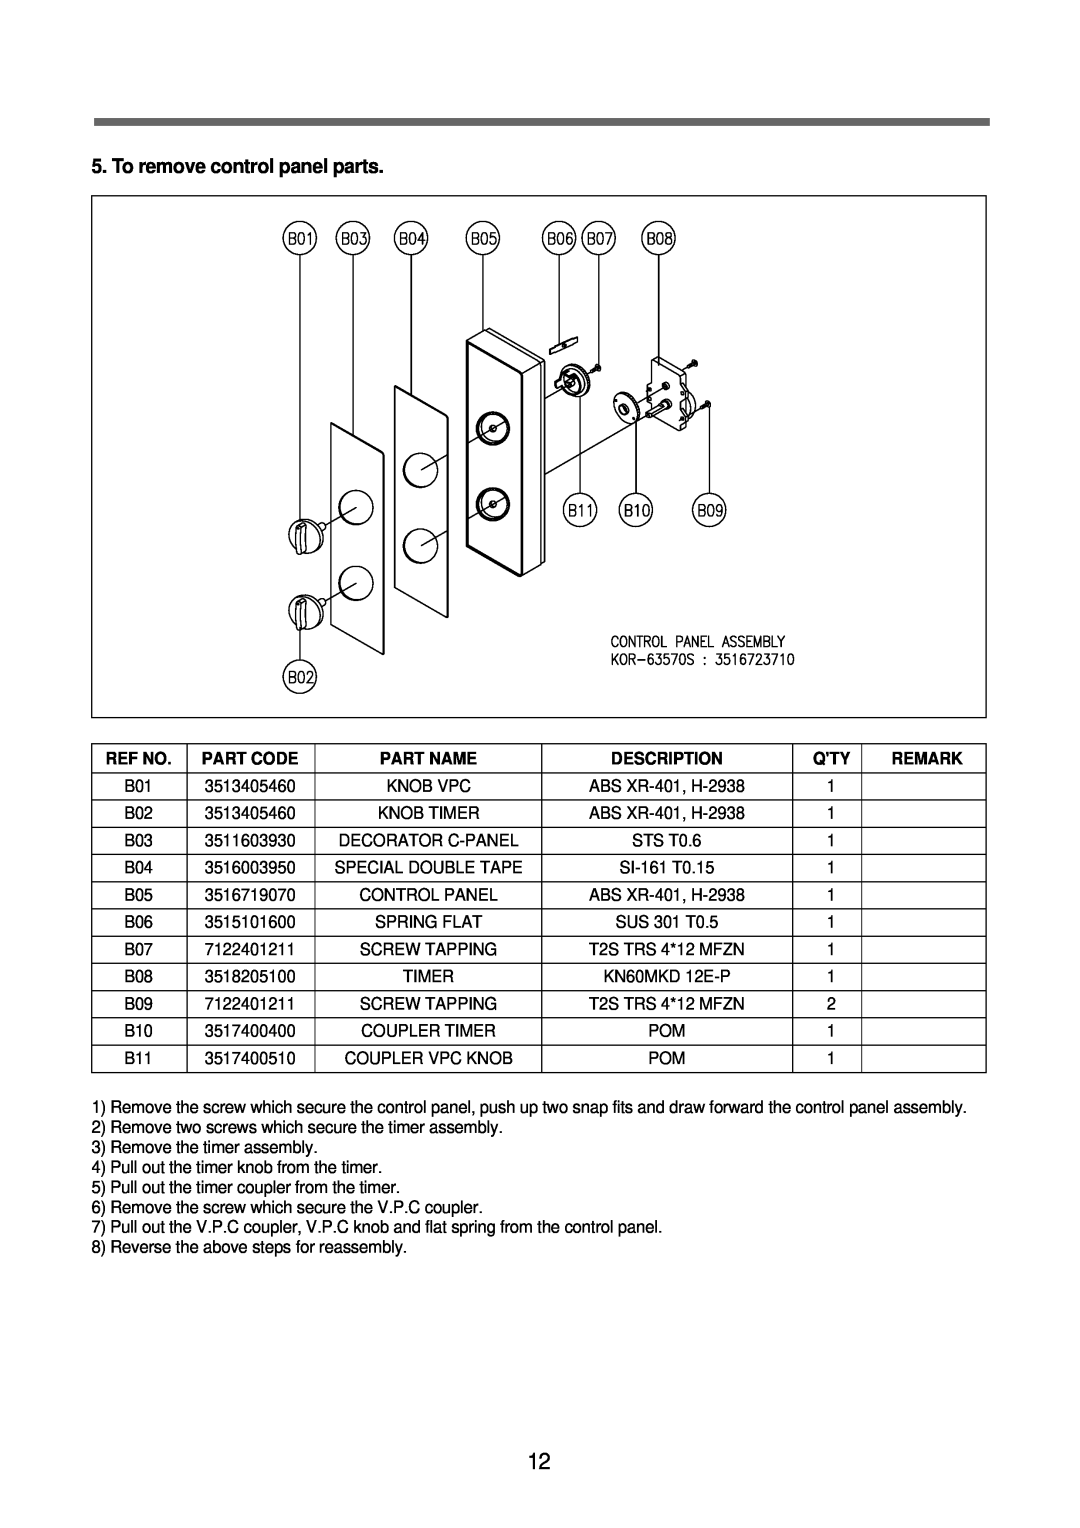 Daewoo KOR-6N575S, Microwave Oven service manual To remove control panel parts, Part Code 